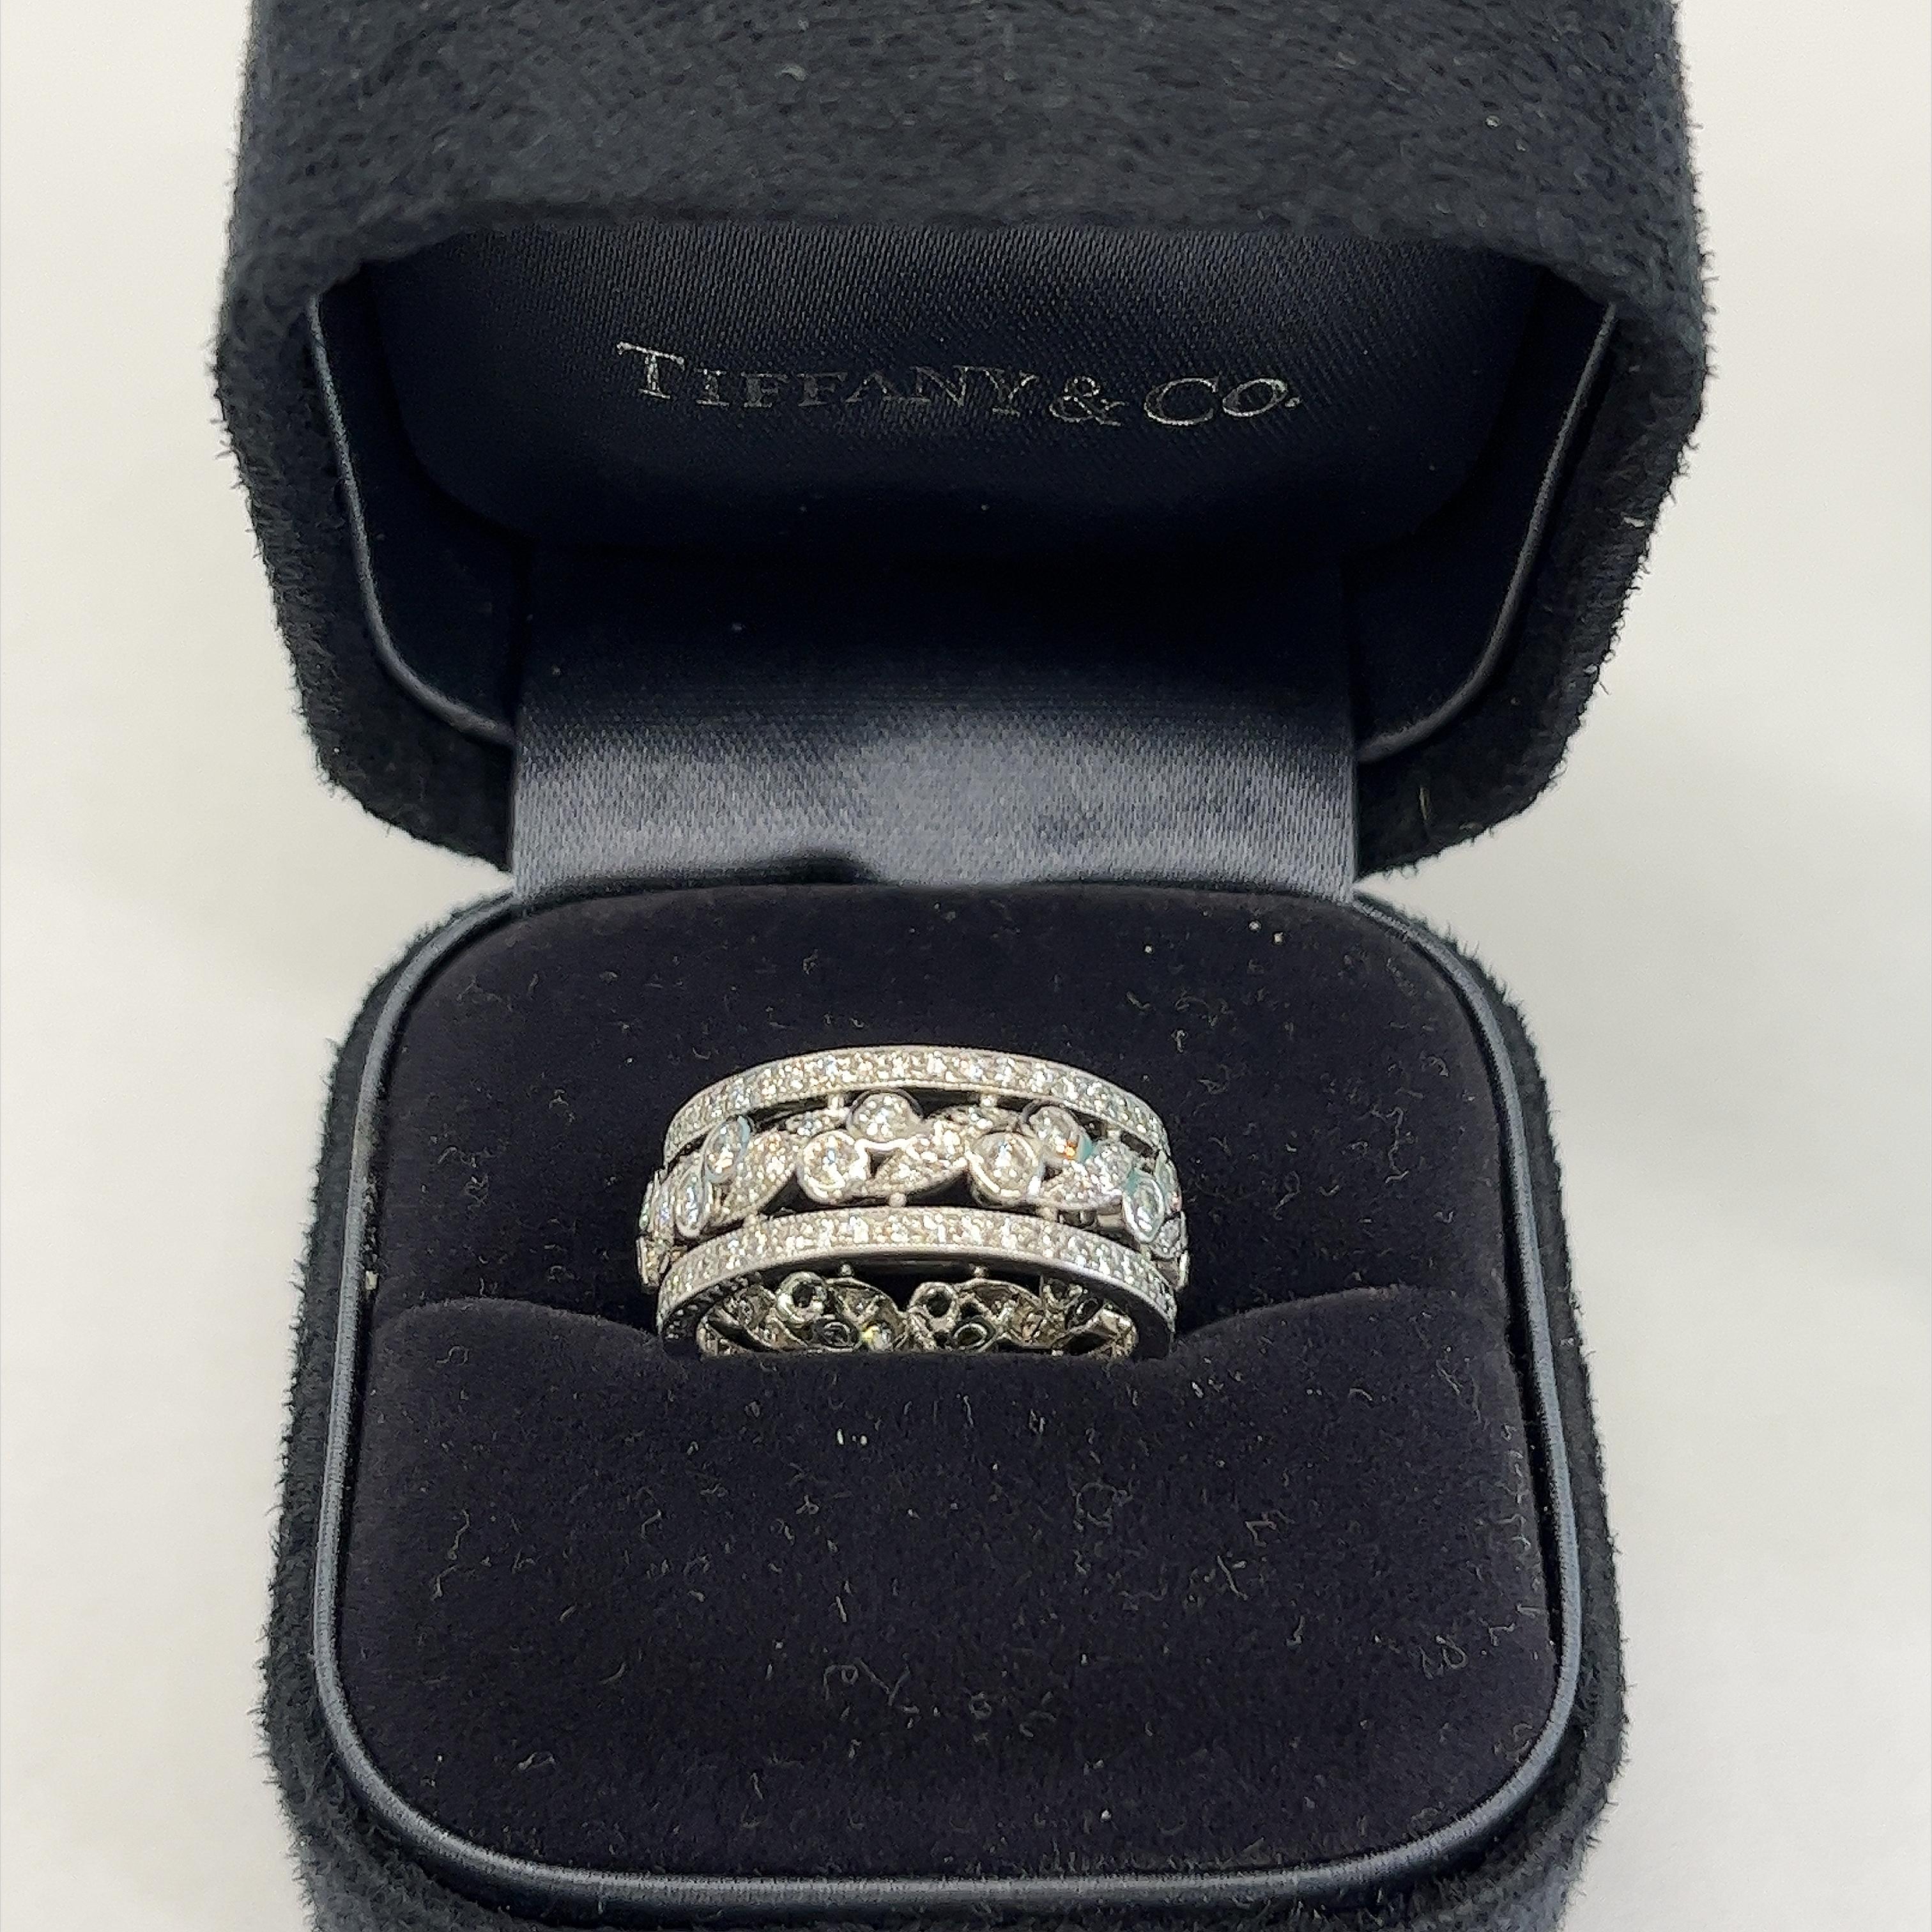 
The Rare Tiffany & Co. Diamond Scroll Wide Band Ring is quite a stunning piece! 
This ring typically features a wide band adorned with intricate scrollwork and set with sparkling diamonds, creating a luxurious and eye-catching design set in